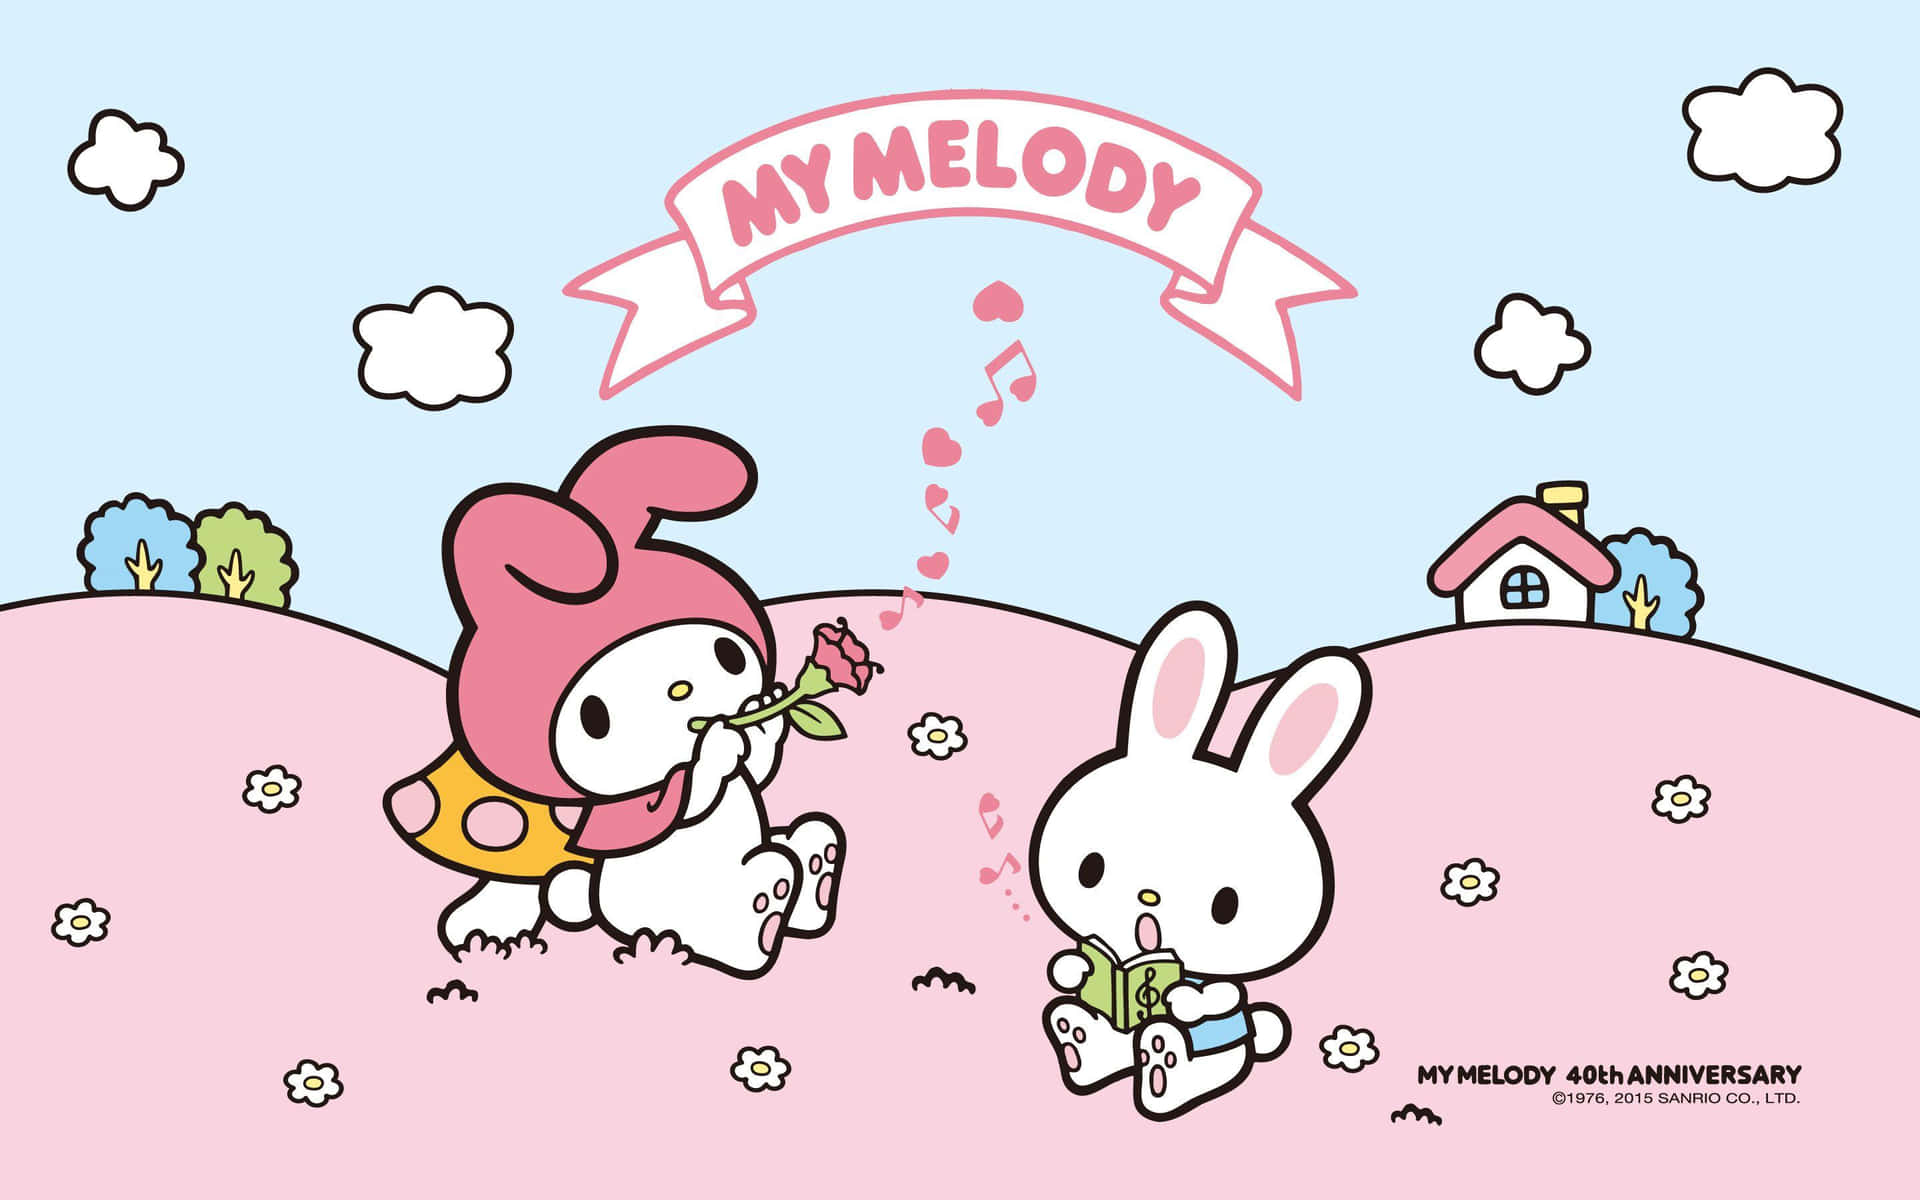 Enjoy a beautiful day with My Melody Desktop Wallpaper